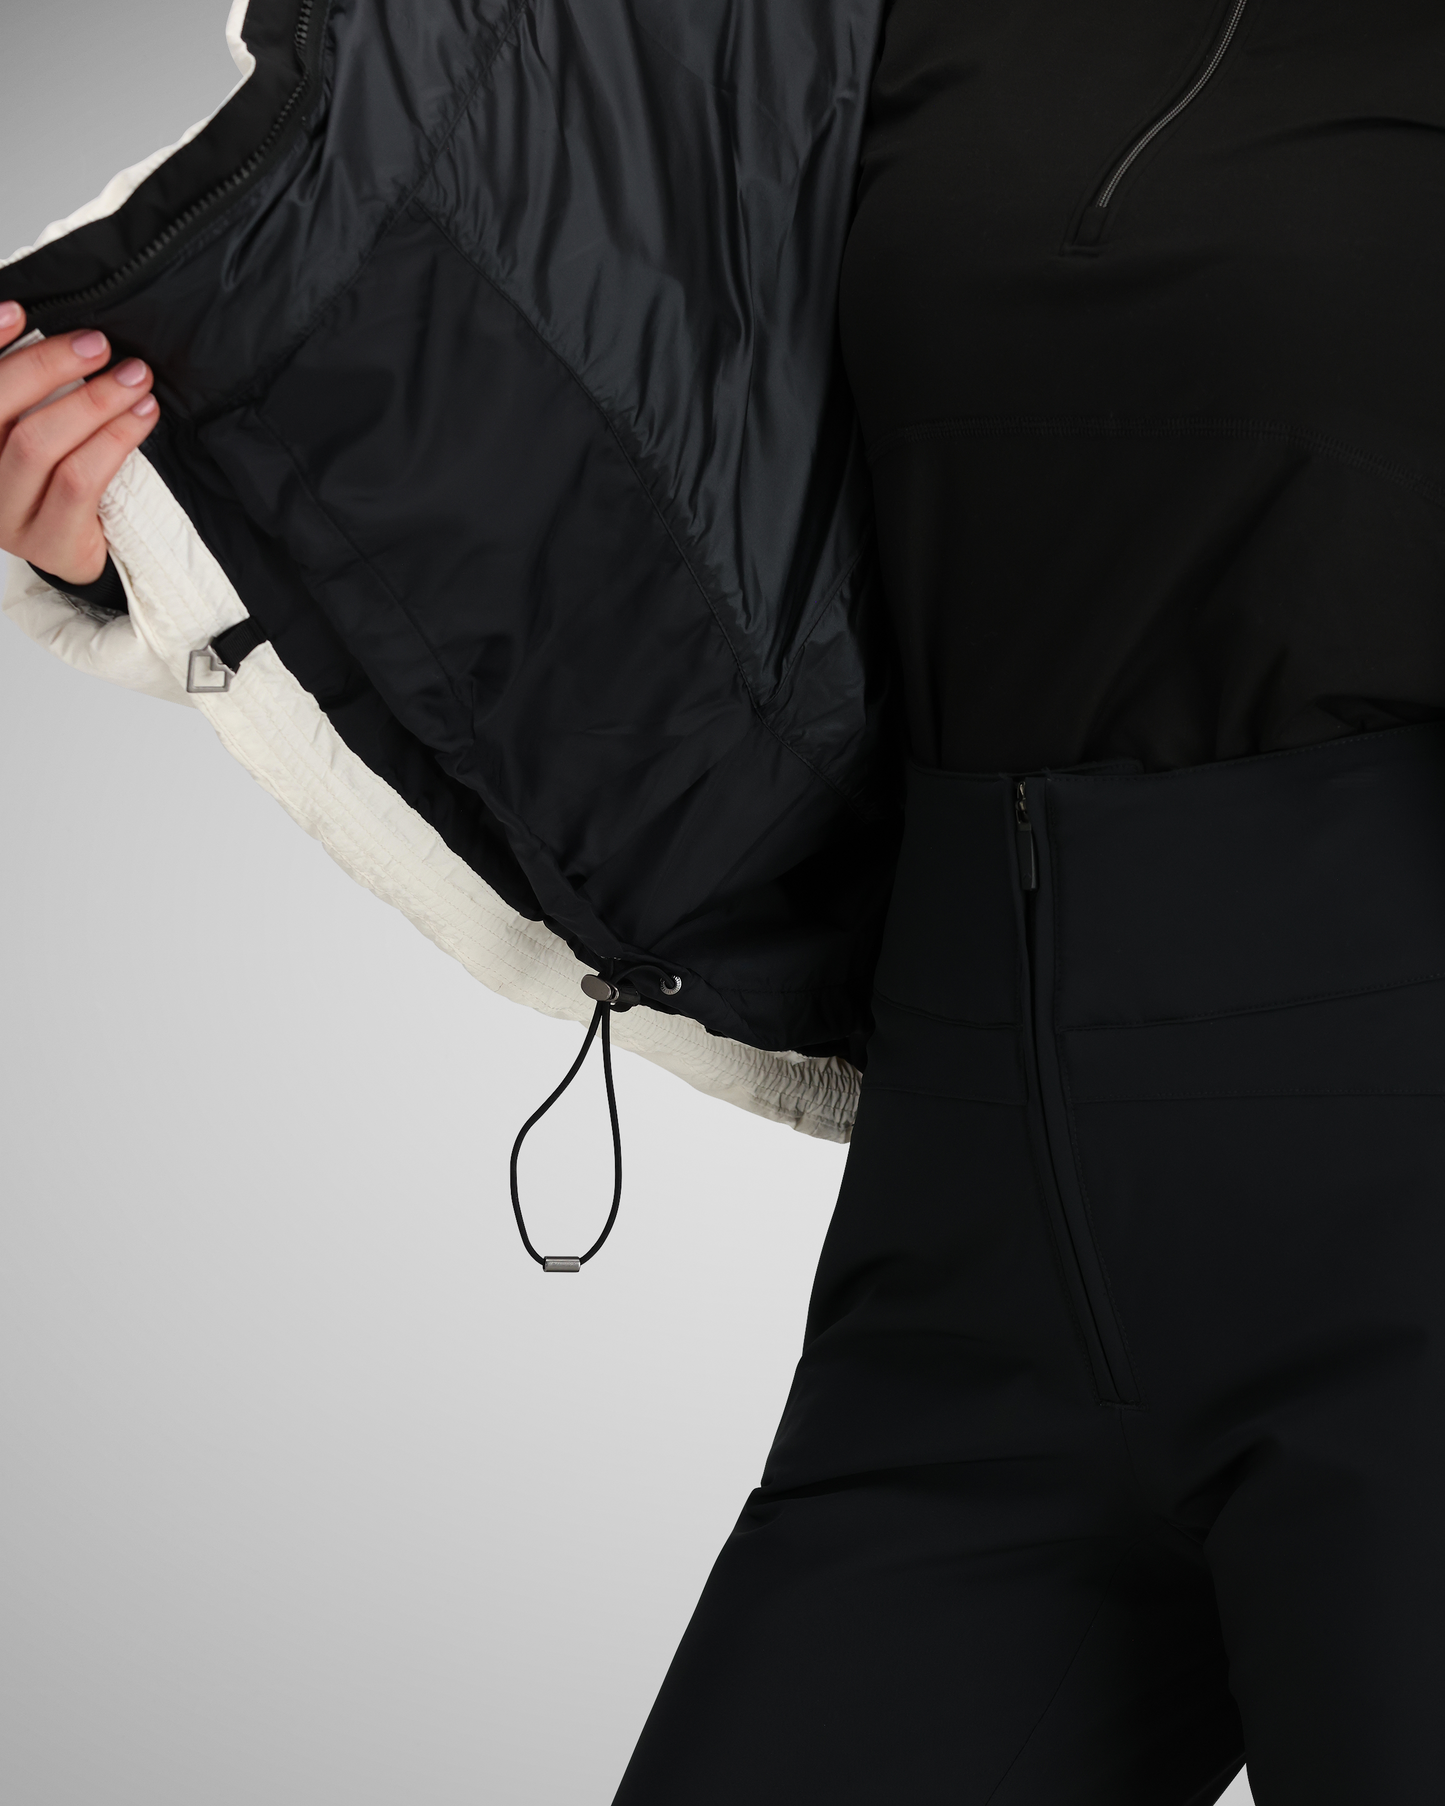 Adjustable hem|On cold snowy days you can gather the hem fabric around your waist to keep out elements. Easy to use and reliable for continual adjustments.